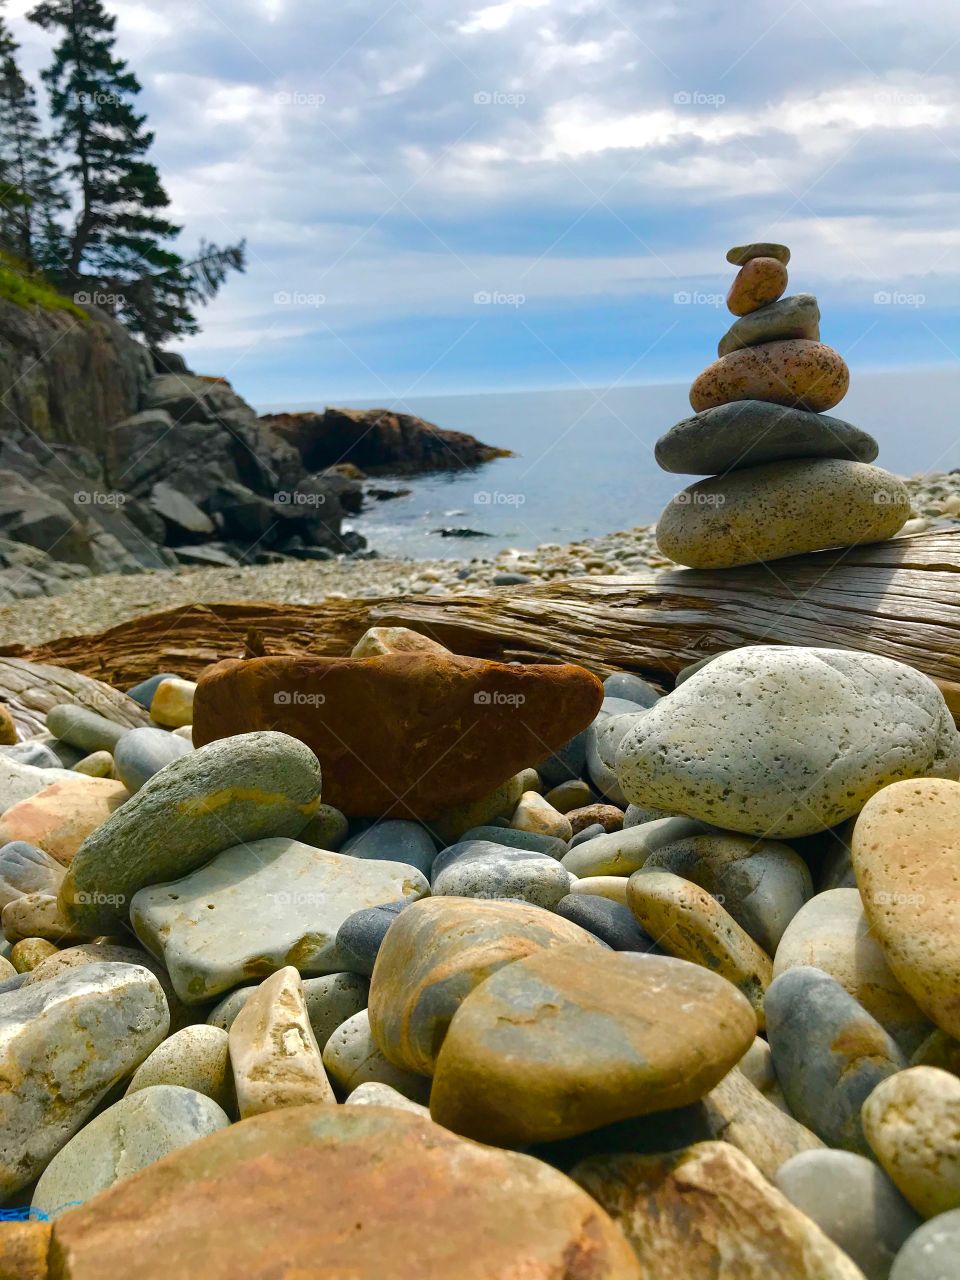 Rock cairn I made in Acadia National Park 